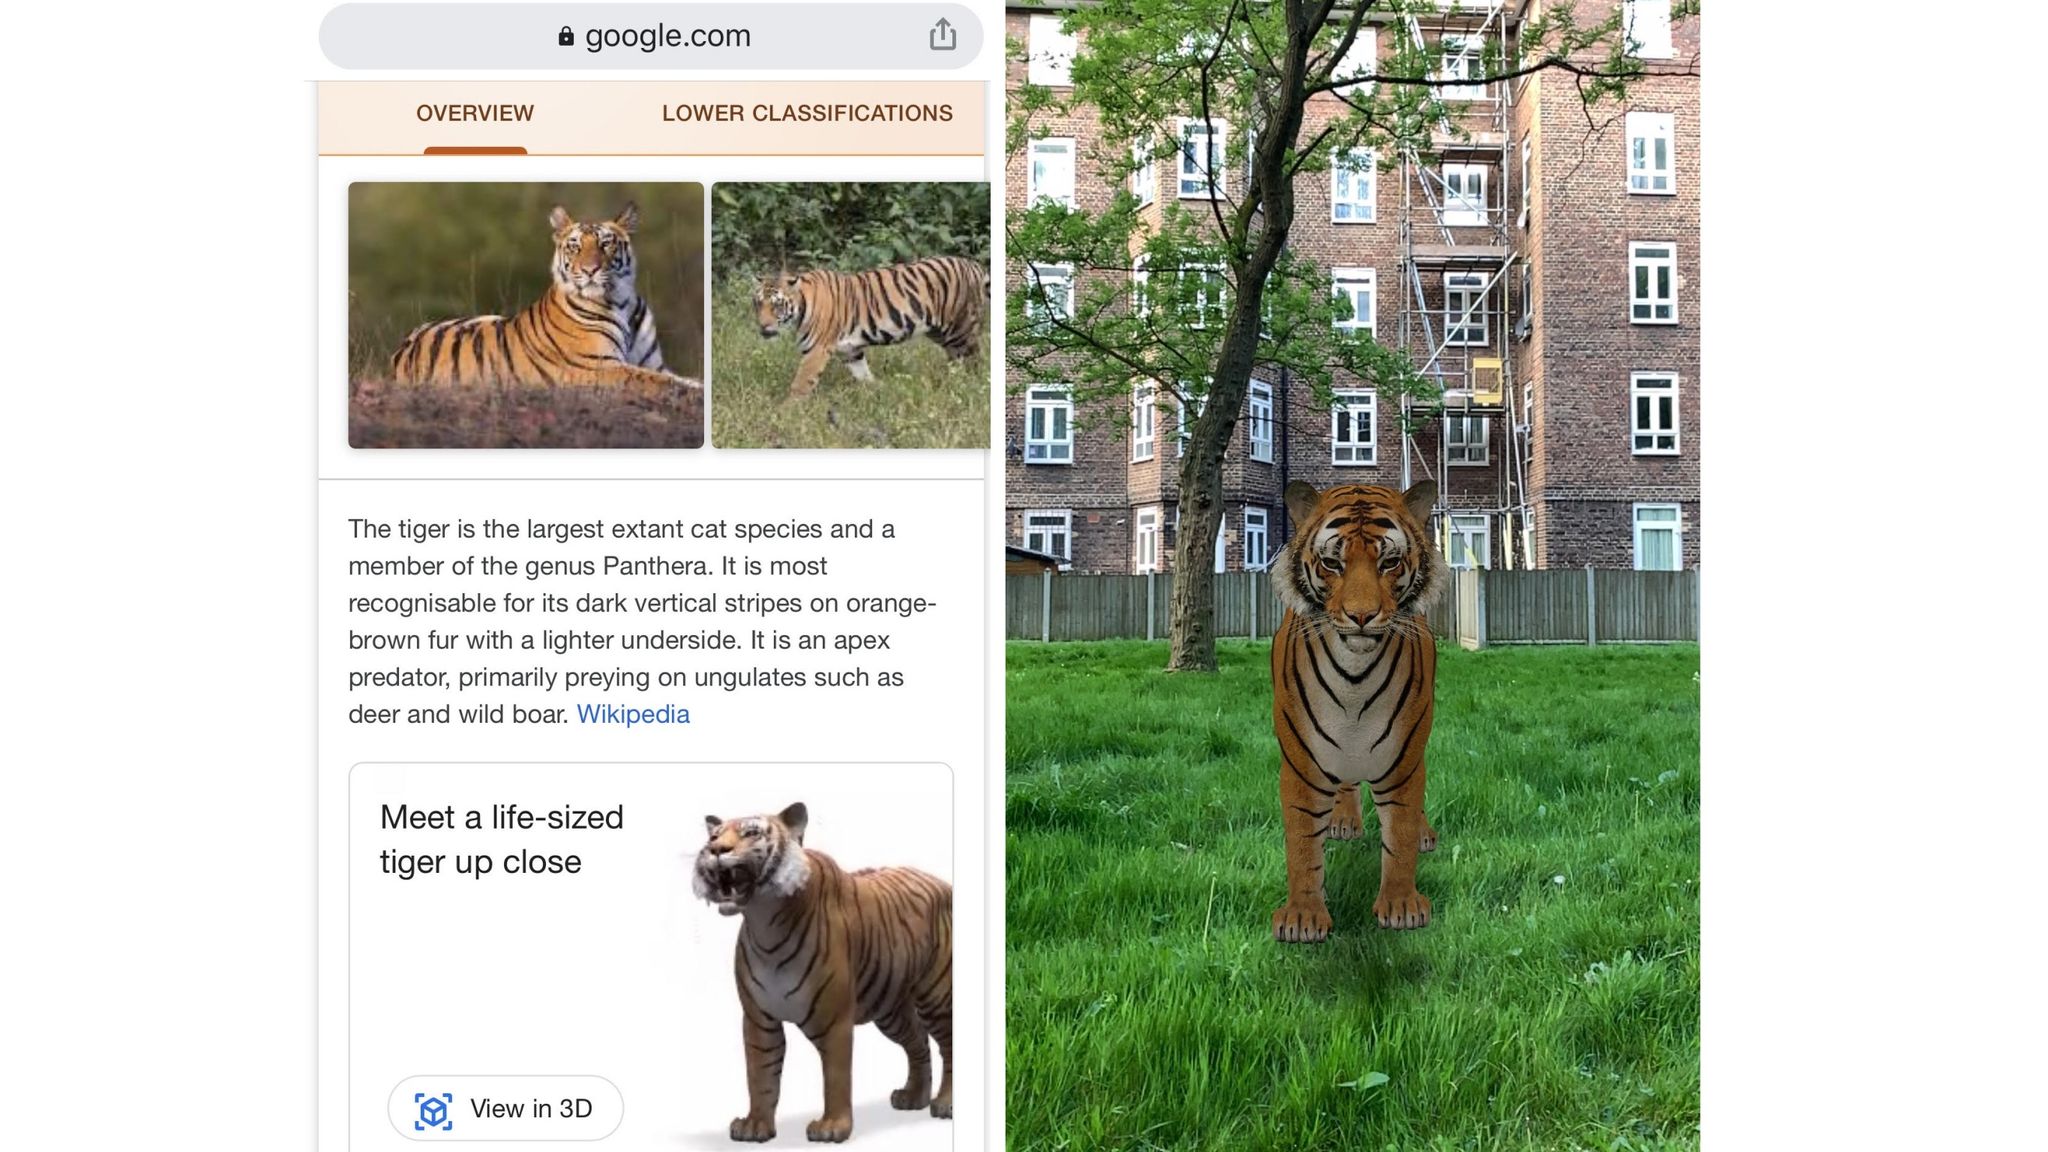 See how to bring 3D animals into your home with Google, through augmented  reality